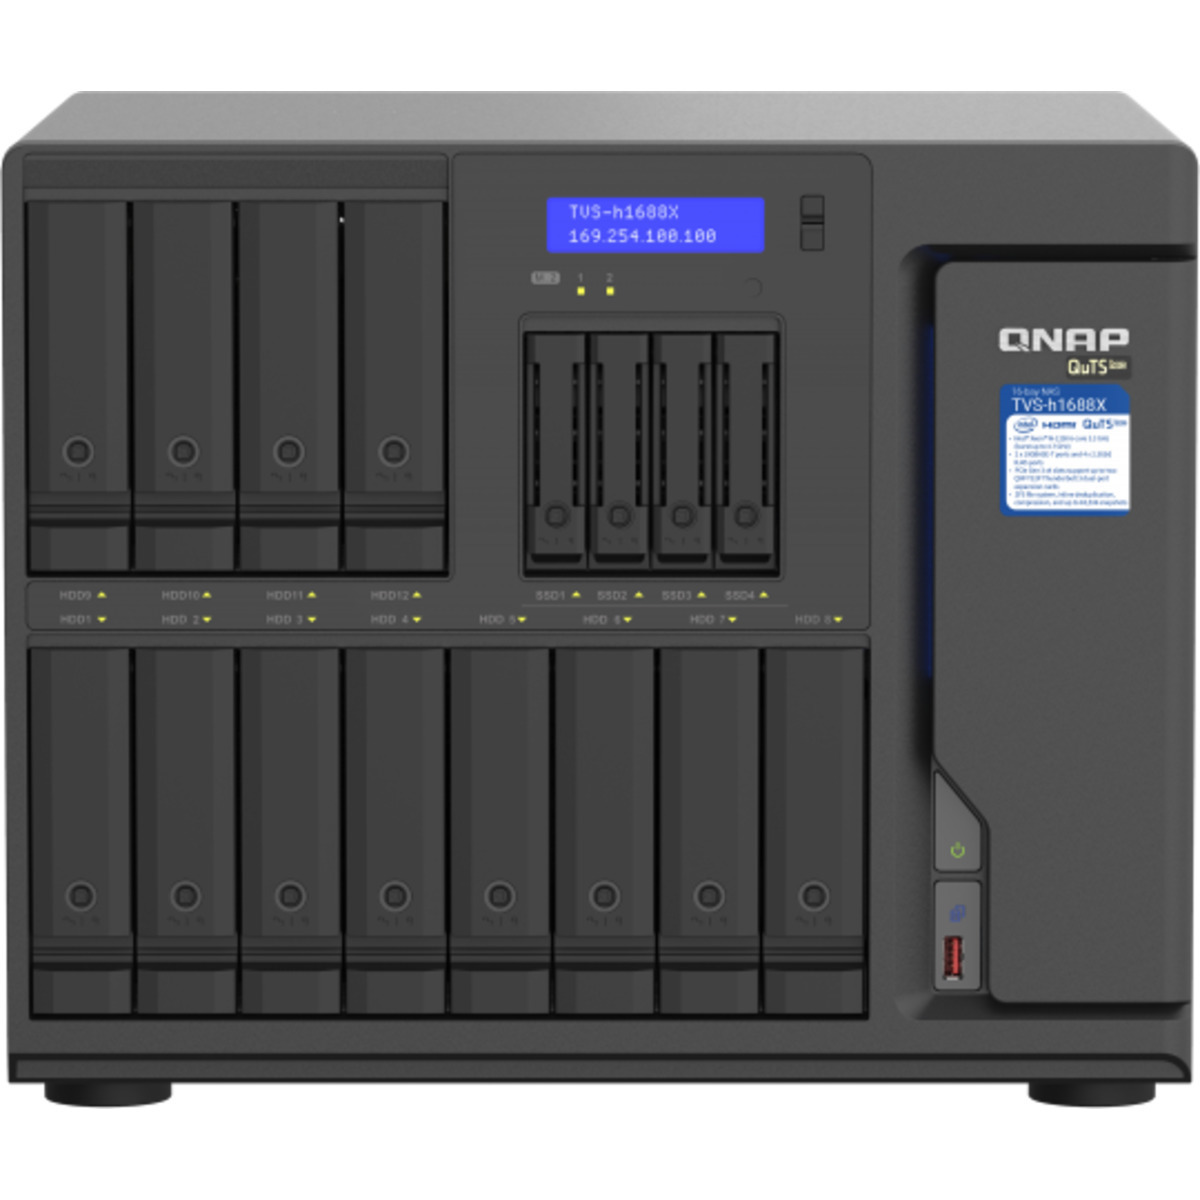 QNAP TVS-h1688X QuTS hero NAS 5.5tb 12+4-Bay Desktop Multimedia / Power User / Business NAS - Network Attached Storage Device 11x500gb Crucial MX500 CT500MX500SSD1 2.5 560/510MB/s SATA 6Gb/s SSD CONSUMER Class Drives Installed - Burn-In Tested TVS-h1688X QuTS hero NAS